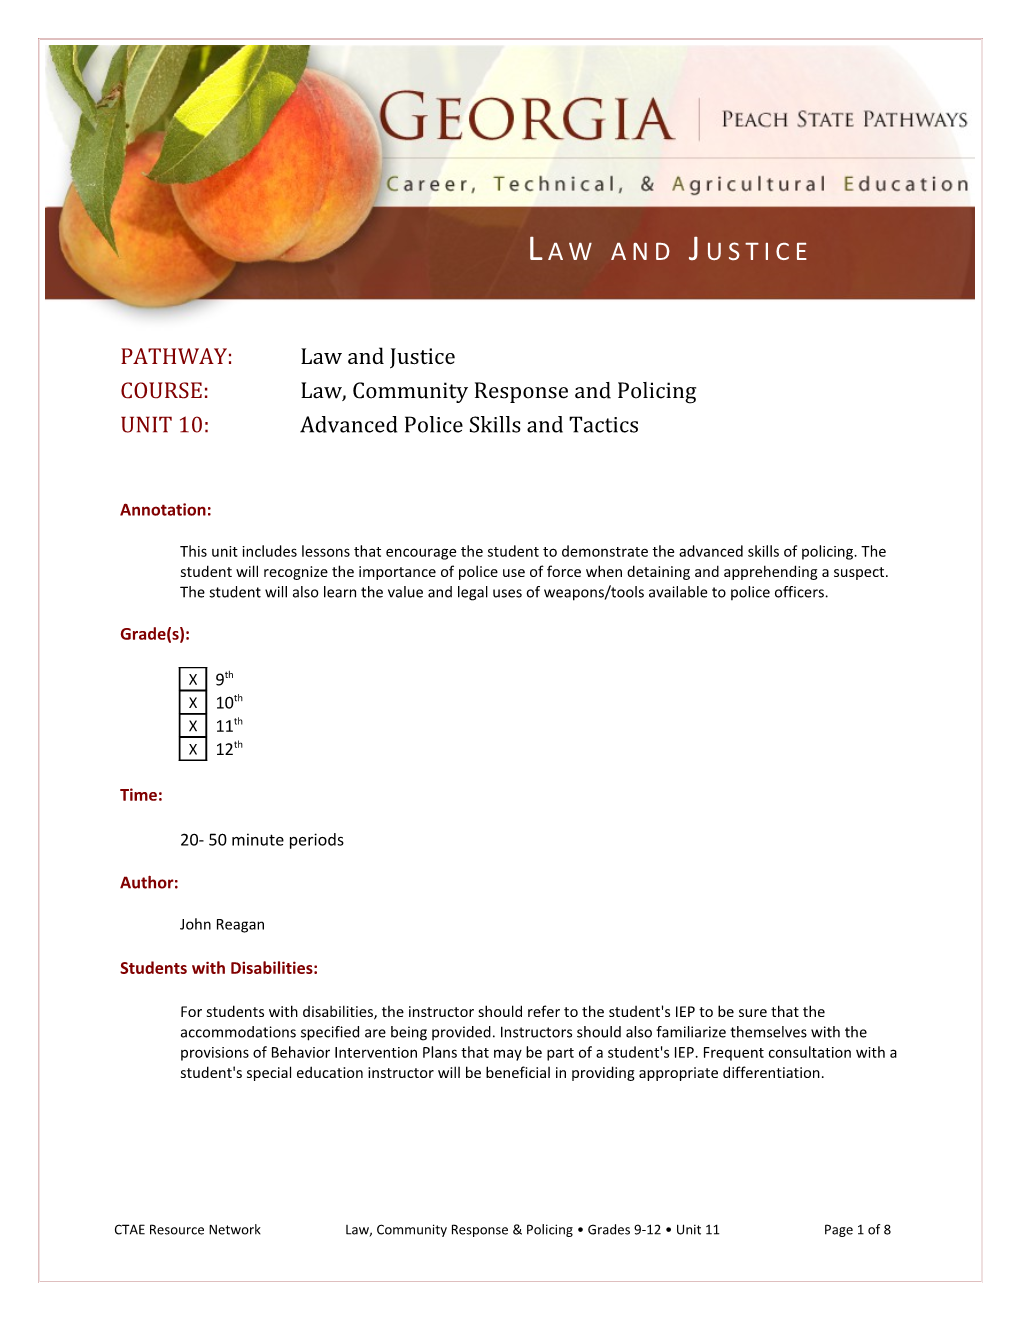 PATHWAY: Law and Justice